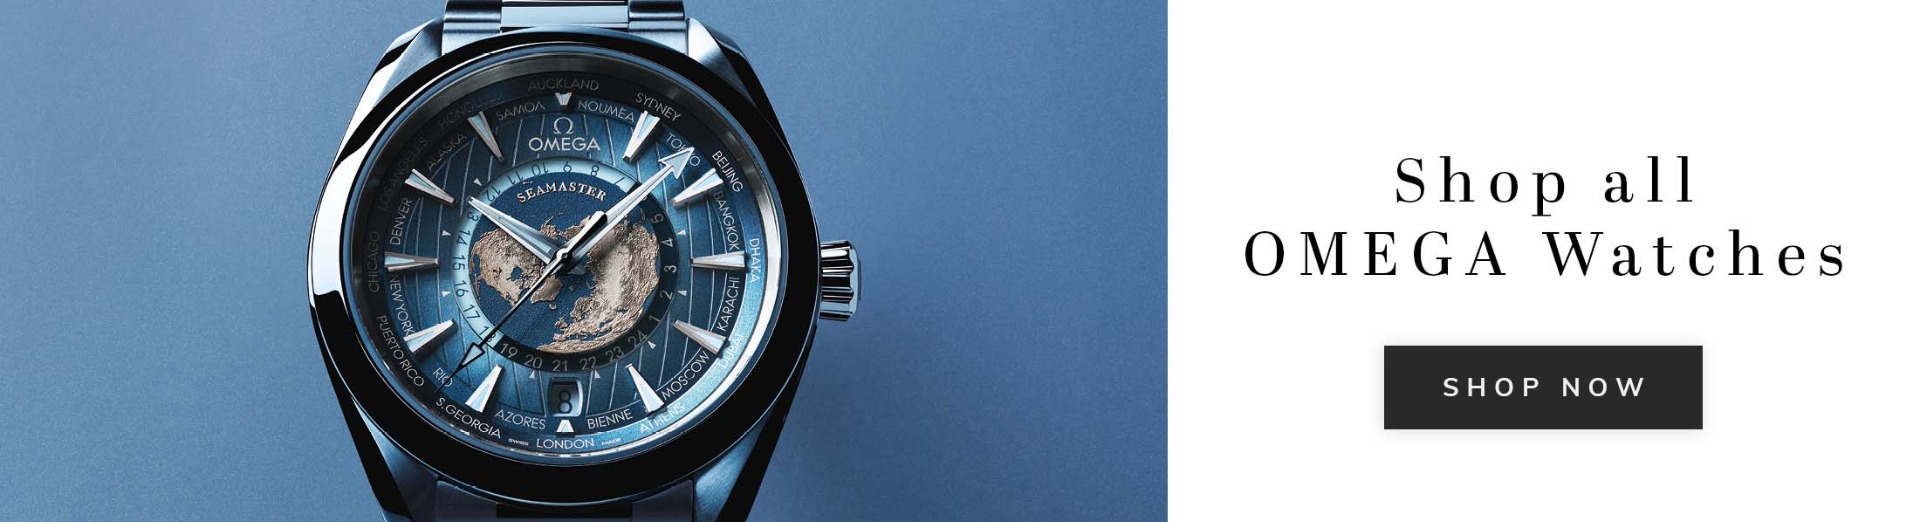 A close up of an OMEGA seamaster Summer Blue dial watch with text shop all OMEGA watches shop now